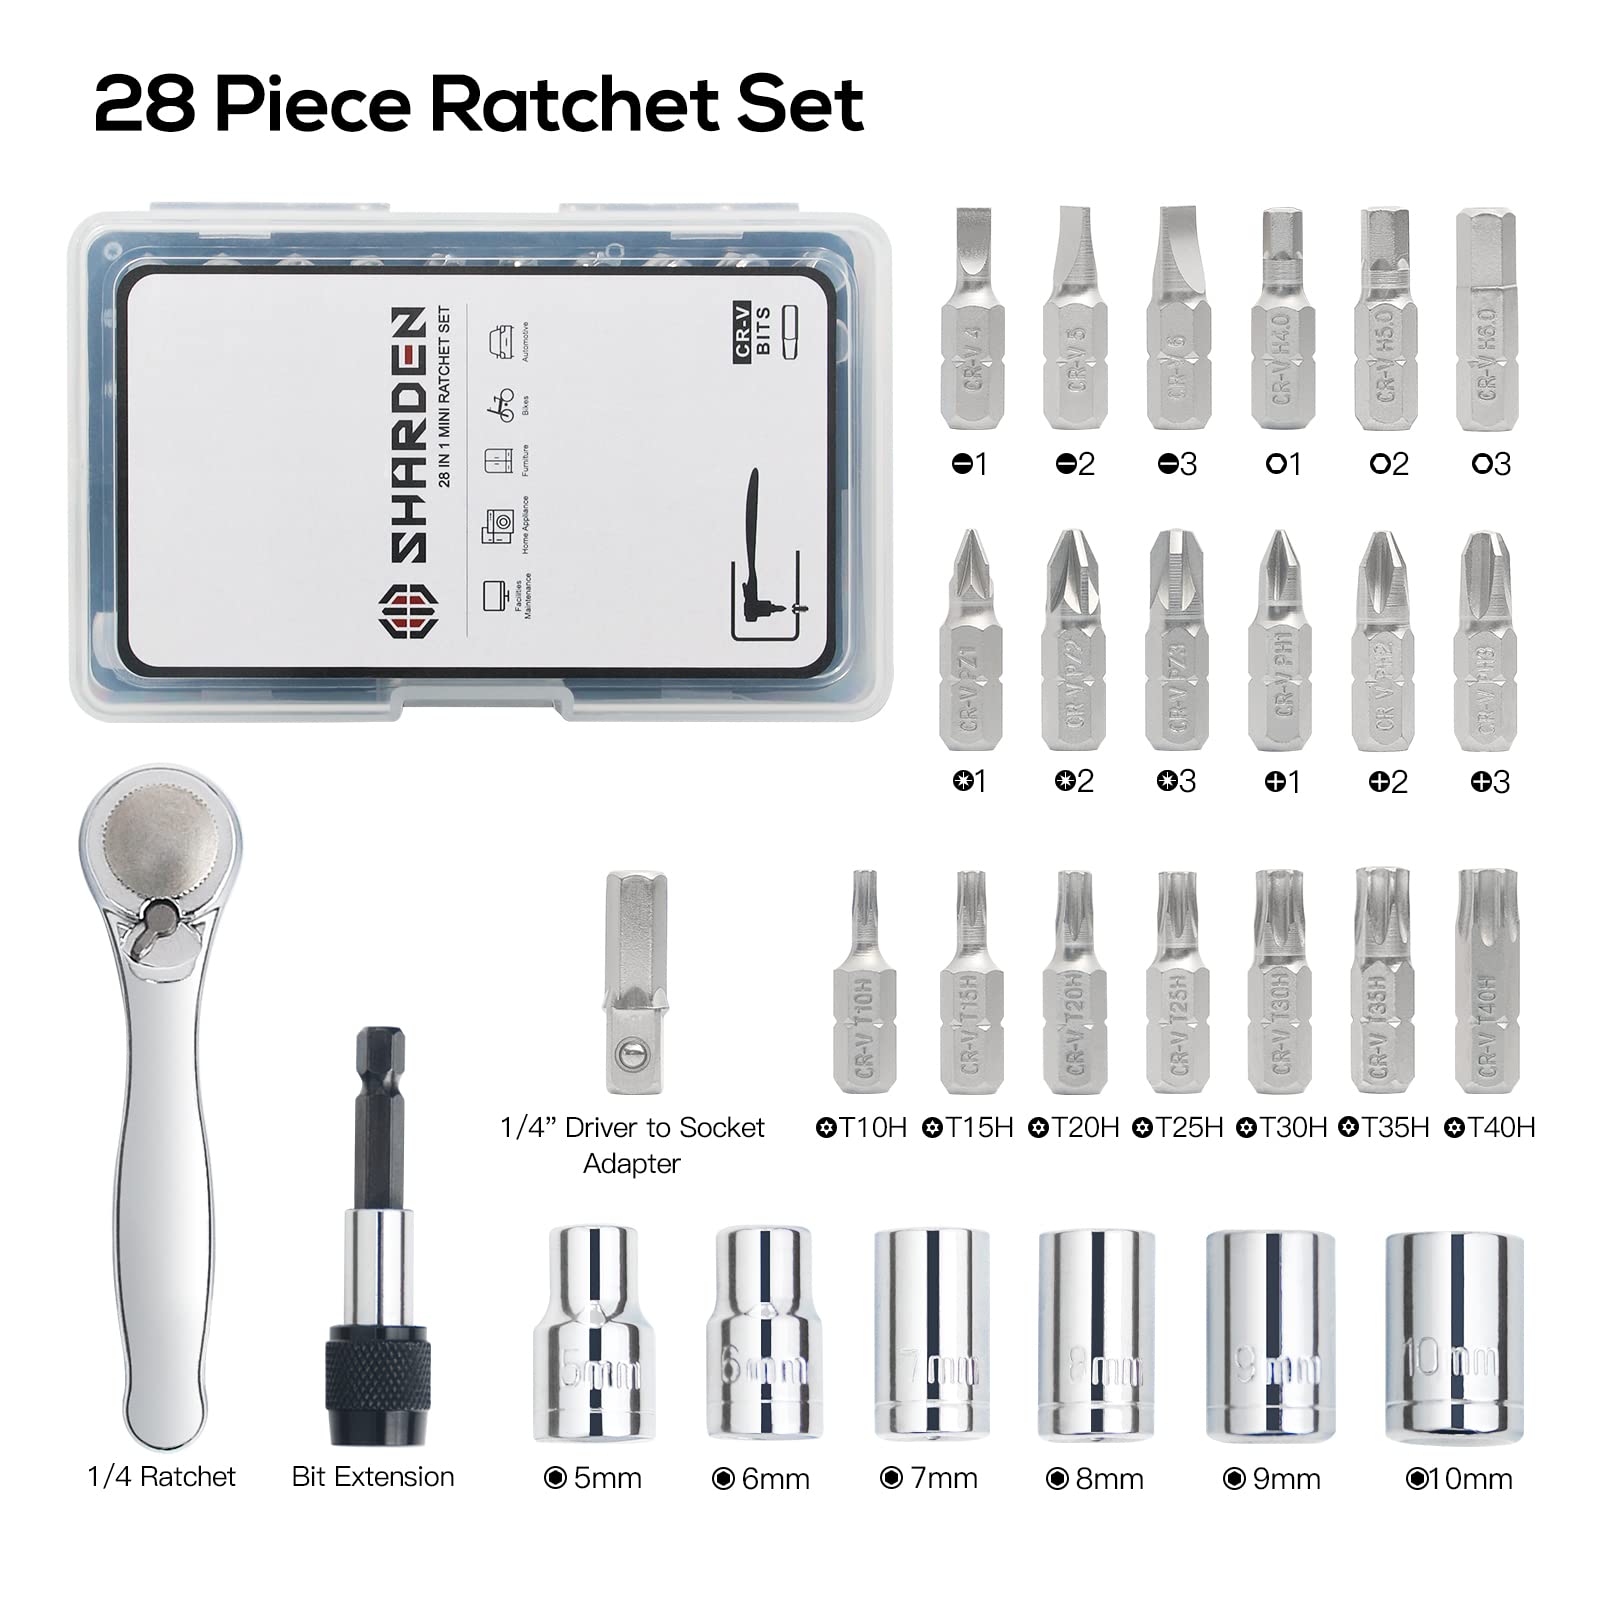 SHARDEN 1/4 Mini Ratchet Set 28pcs Right Angle Screwdriver and Bit with Metric Socket Set, 72 Tooth Small Ratcheting Wrench Offset Screwdriver Low Profile Stubby Ratchet for Tight Spaces